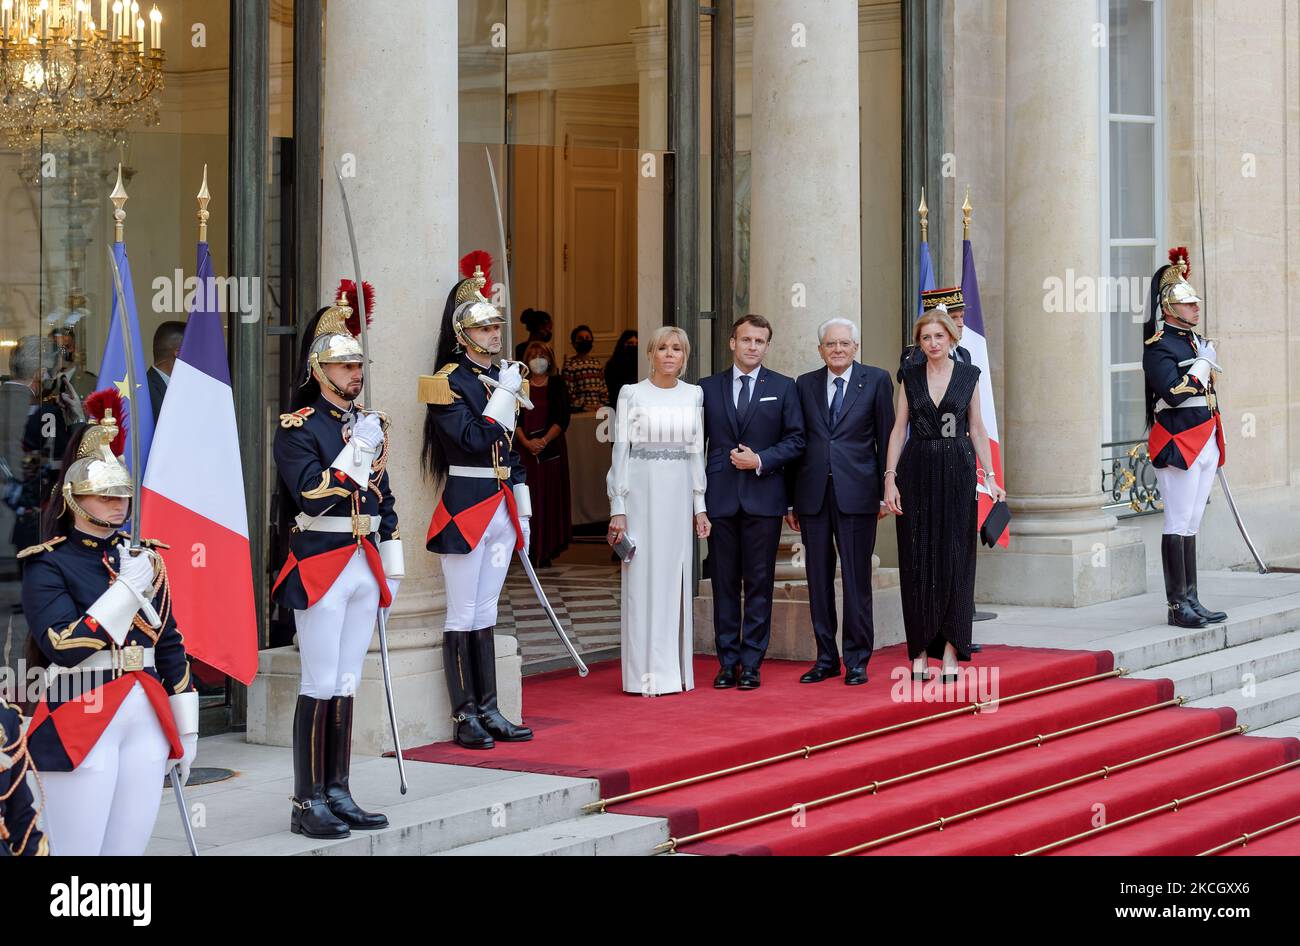 Italian President Sergio Mattarella (C)and his daughter Laura Mattarella (L) arrive for state diner with French President Emmanuel Macron (C) and his wife Brigitte Macron (L) at the Elysee Palace in Paris, on July 5, 2021 (Photo by Daniel Pier/NurPhoto) Stock Photo